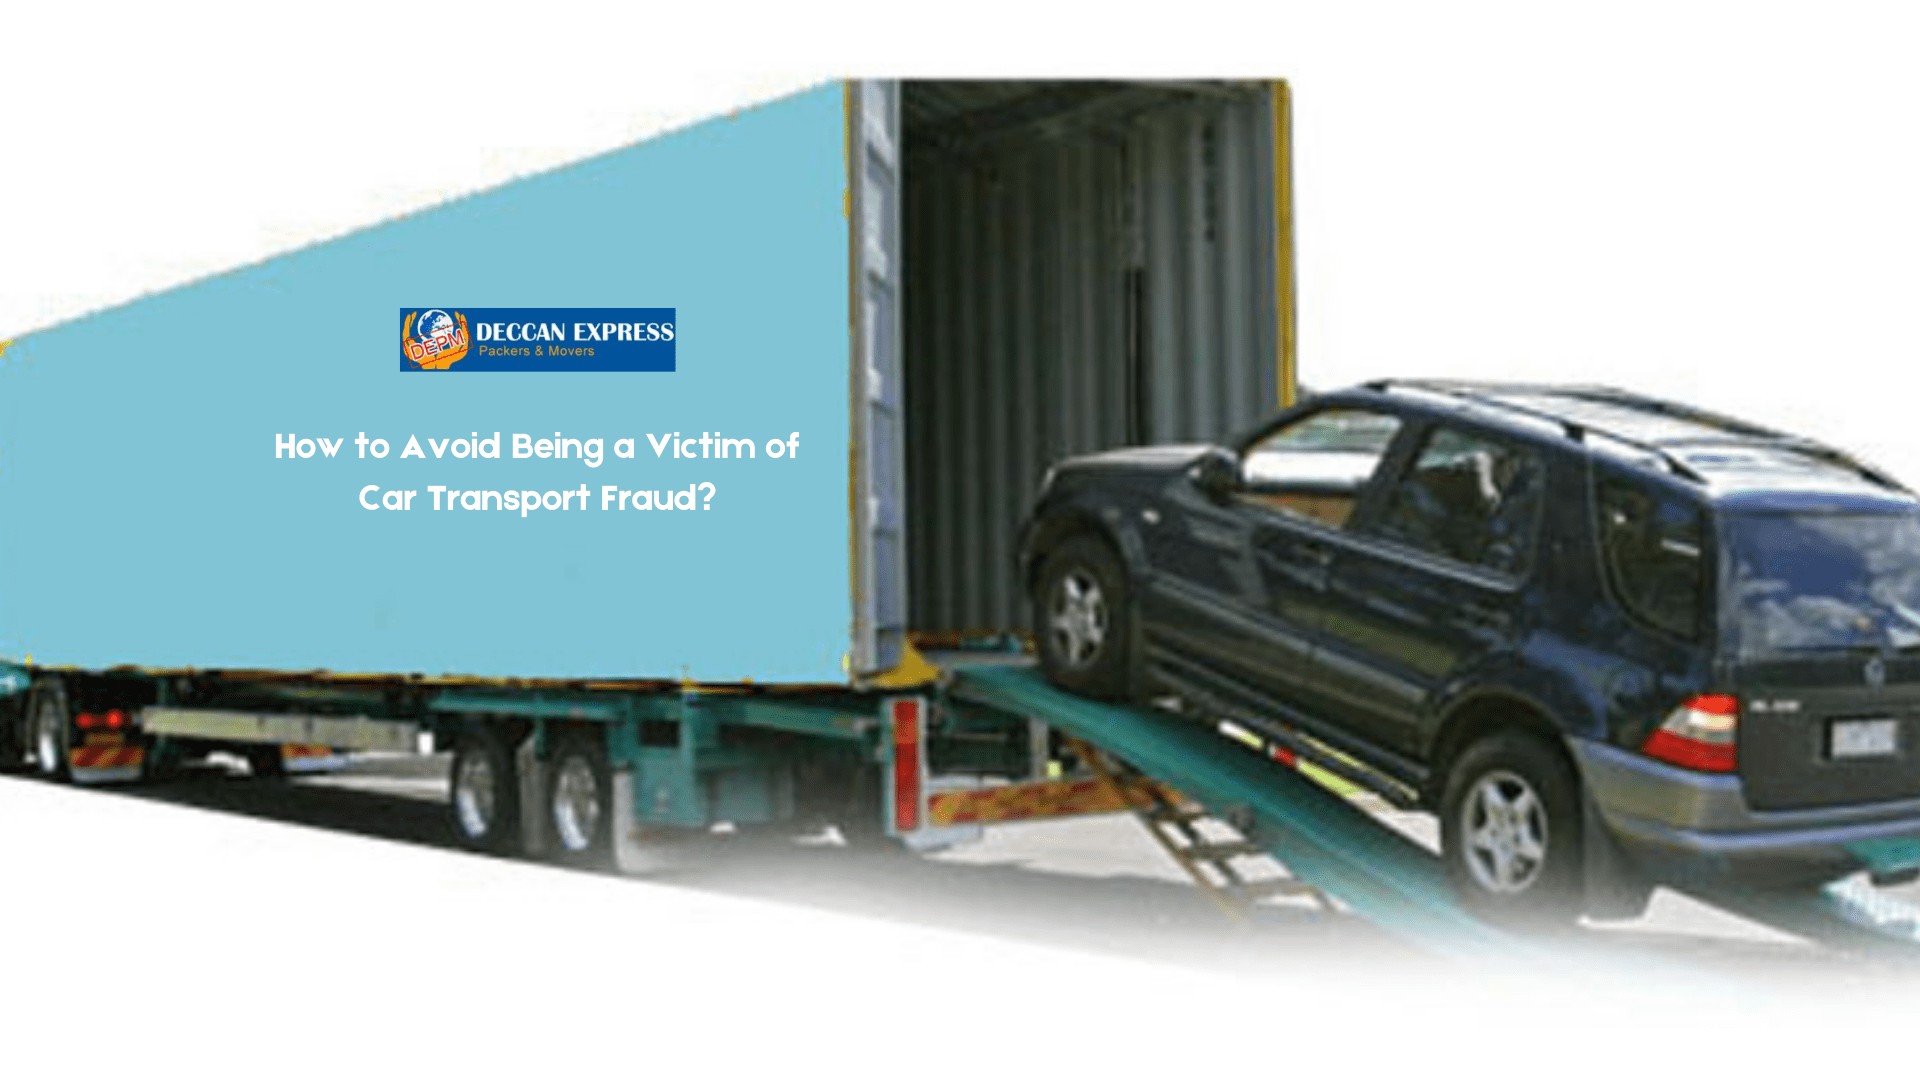 How to Avoid Being a Victim of Car Transport Fraud?